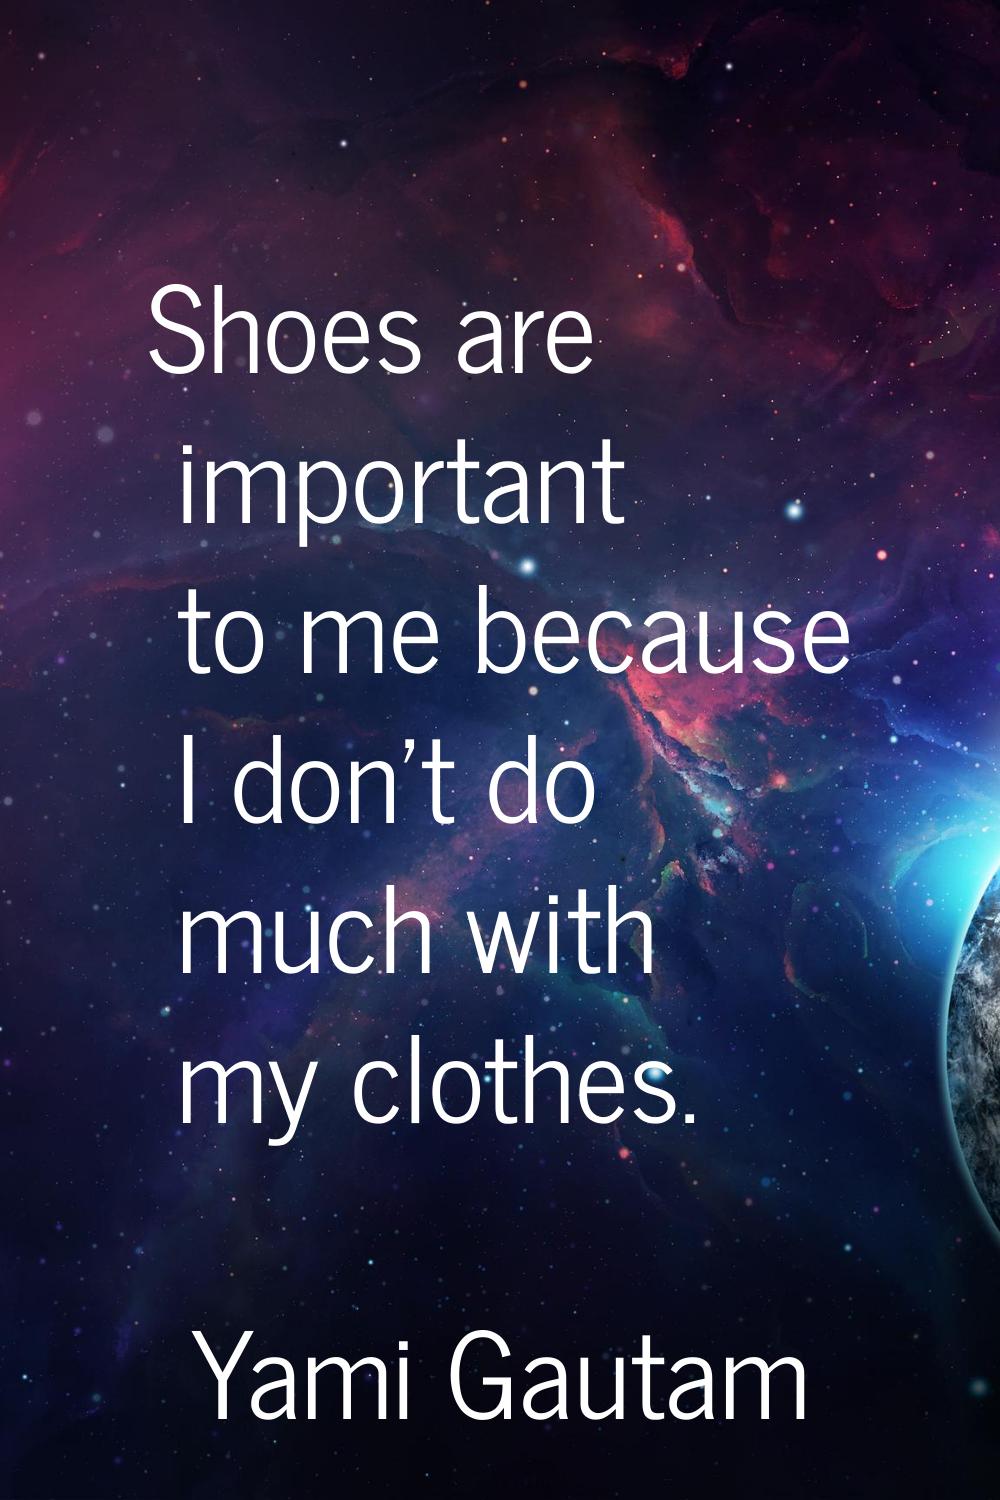 Shoes are important to me because I don't do much with my clothes.